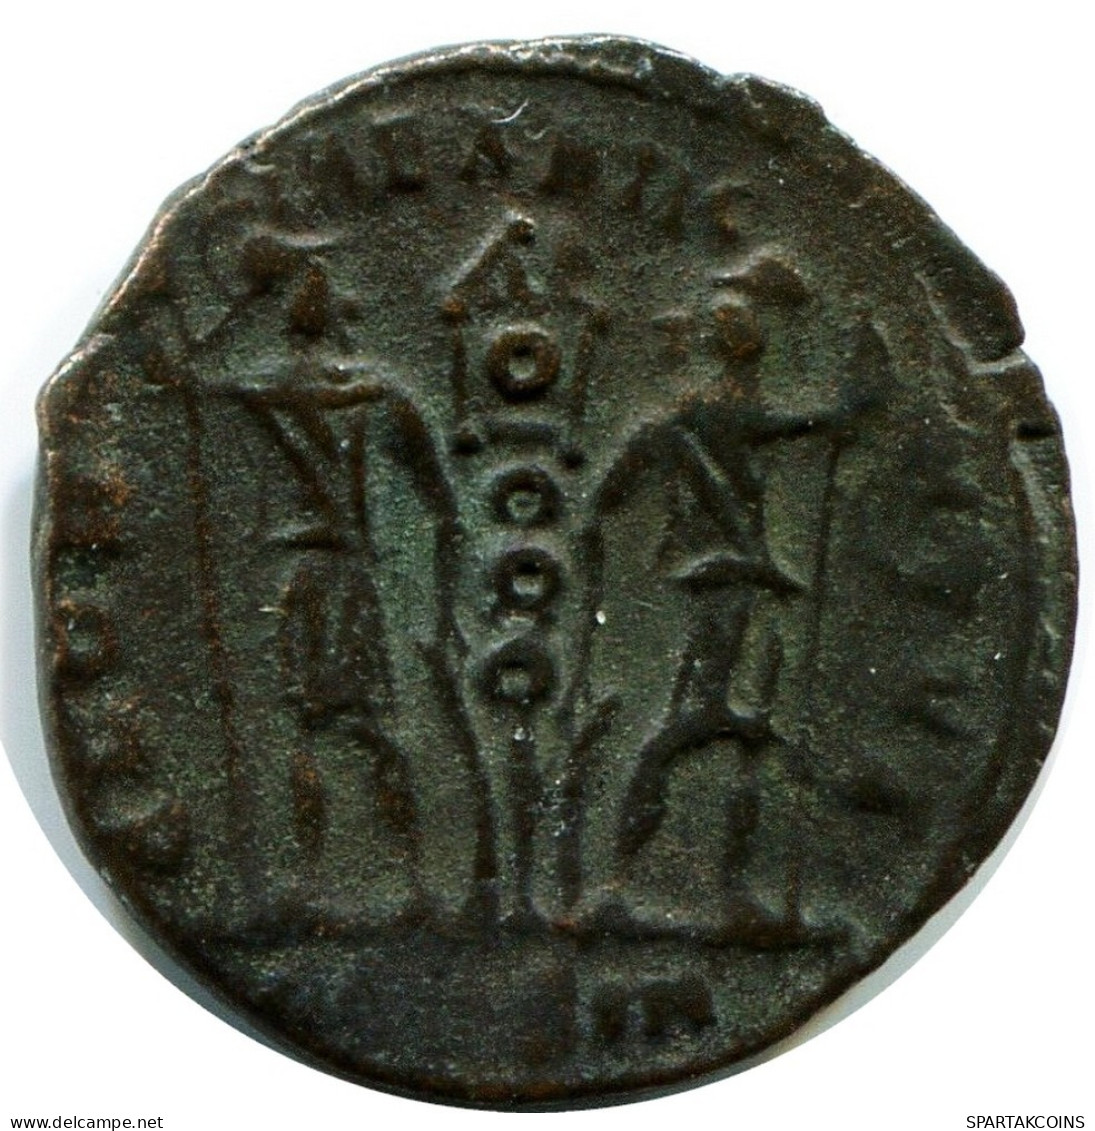 CONSTANS MINTED IN CONSTANTINOPLE FOUND IN IHNASYAH HOARD EGYPT #ANC11958.14.D.A - L'Empire Chrétien (307 à 363)